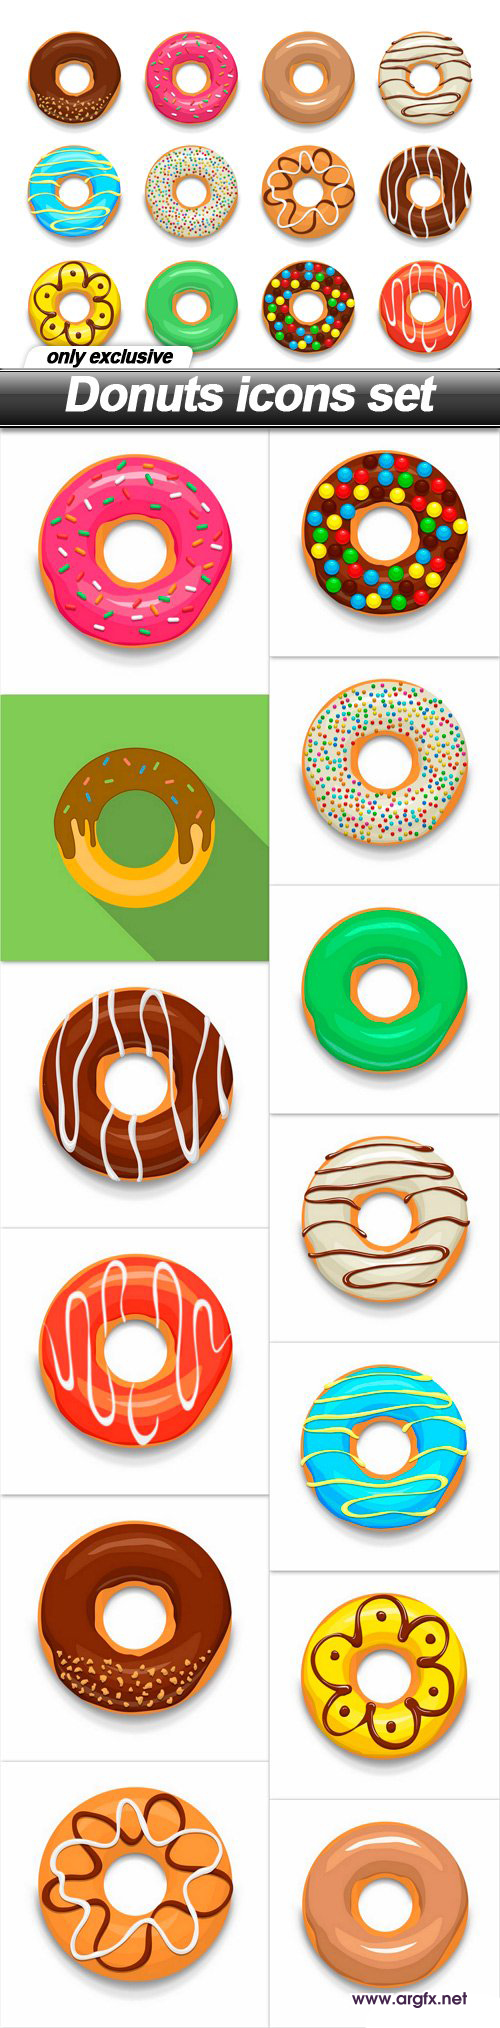  Donuts icons set - 14 EPS